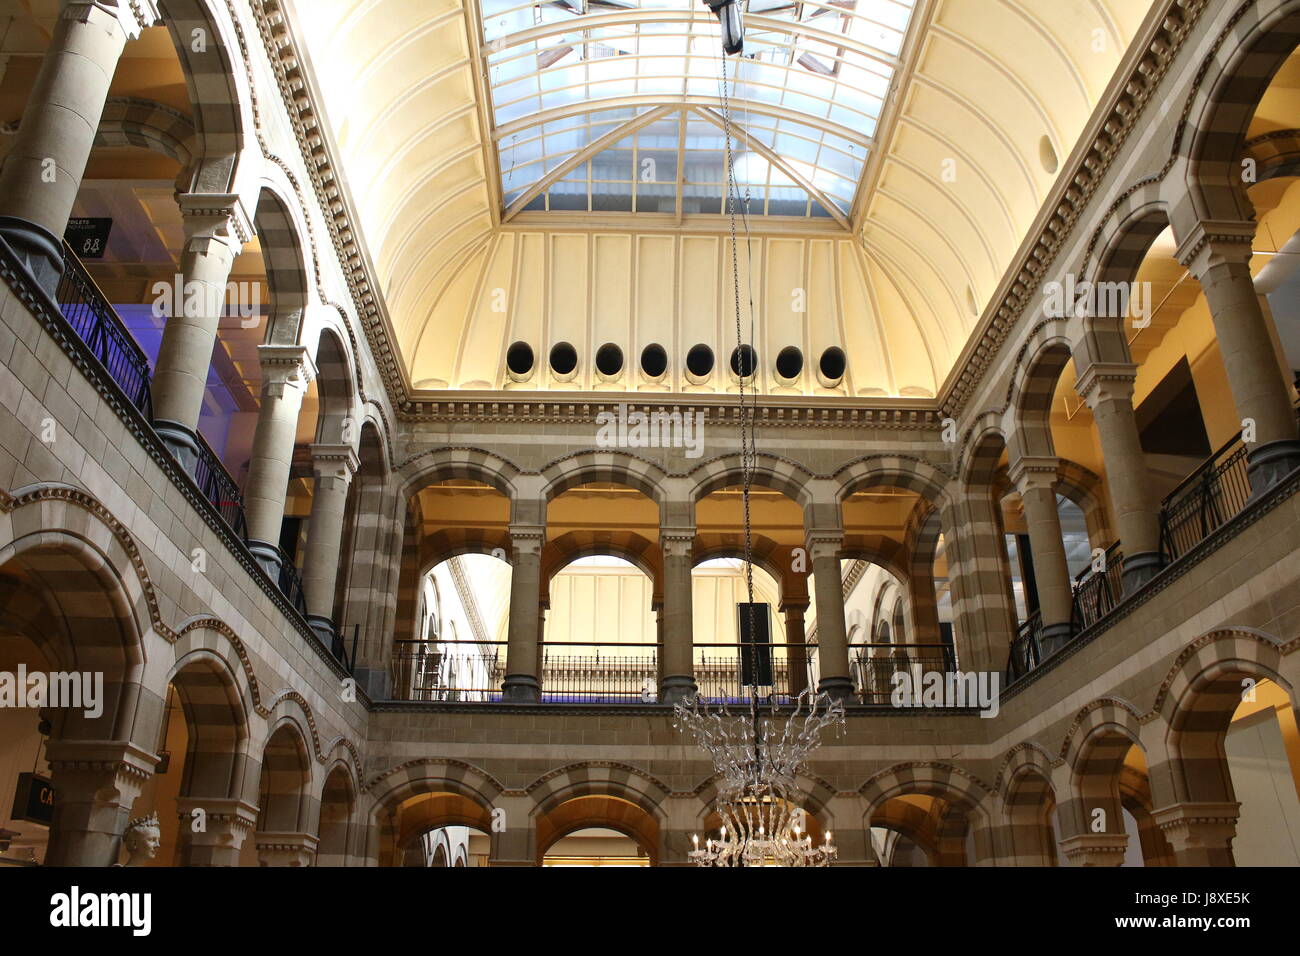 Interior of the late 19th century Neo Gothic Magna Plaza shopping mall at  Nieuwezijds Voorburgwal, Amsterdam, Netherlands Stock Photo - Alamy